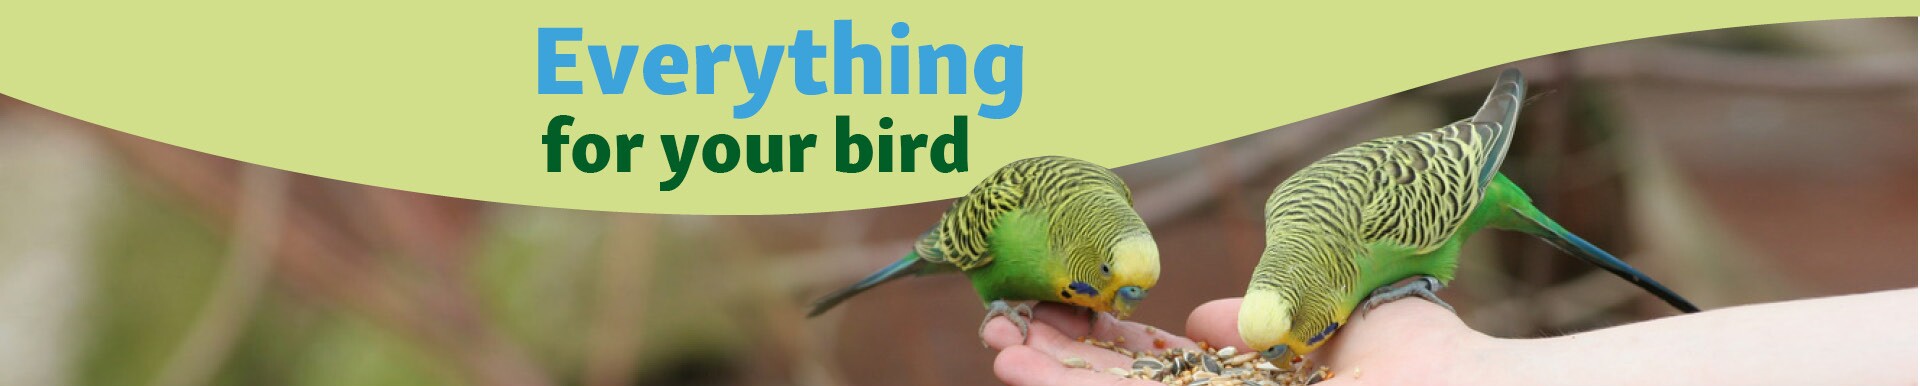 Everything for your bird